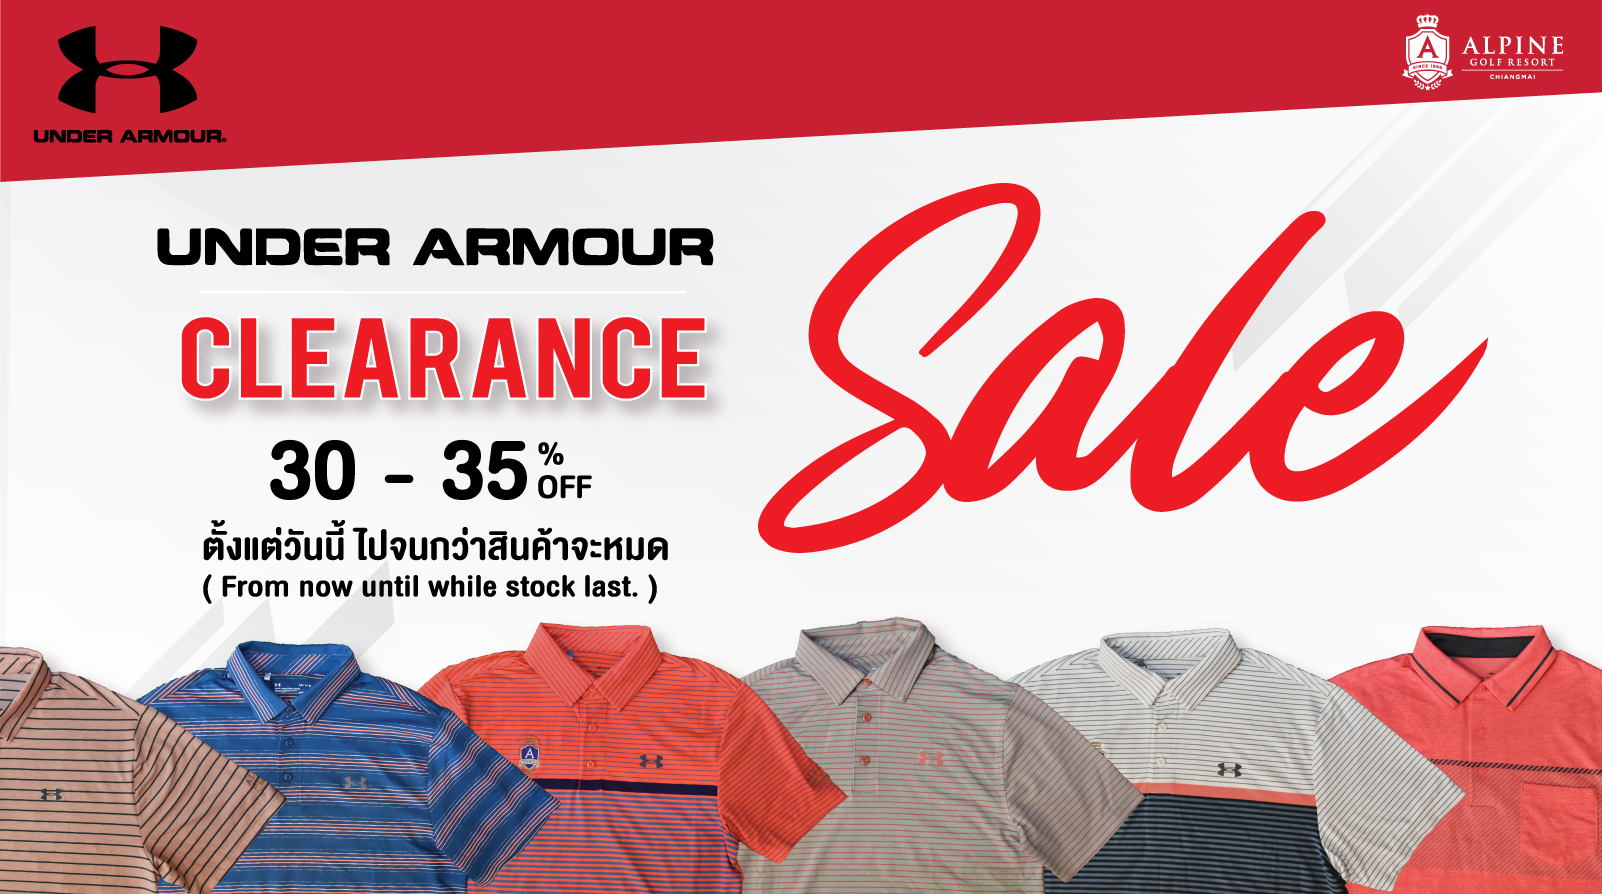 Under Armour Clearance Sale Discount 30 - 35% Off